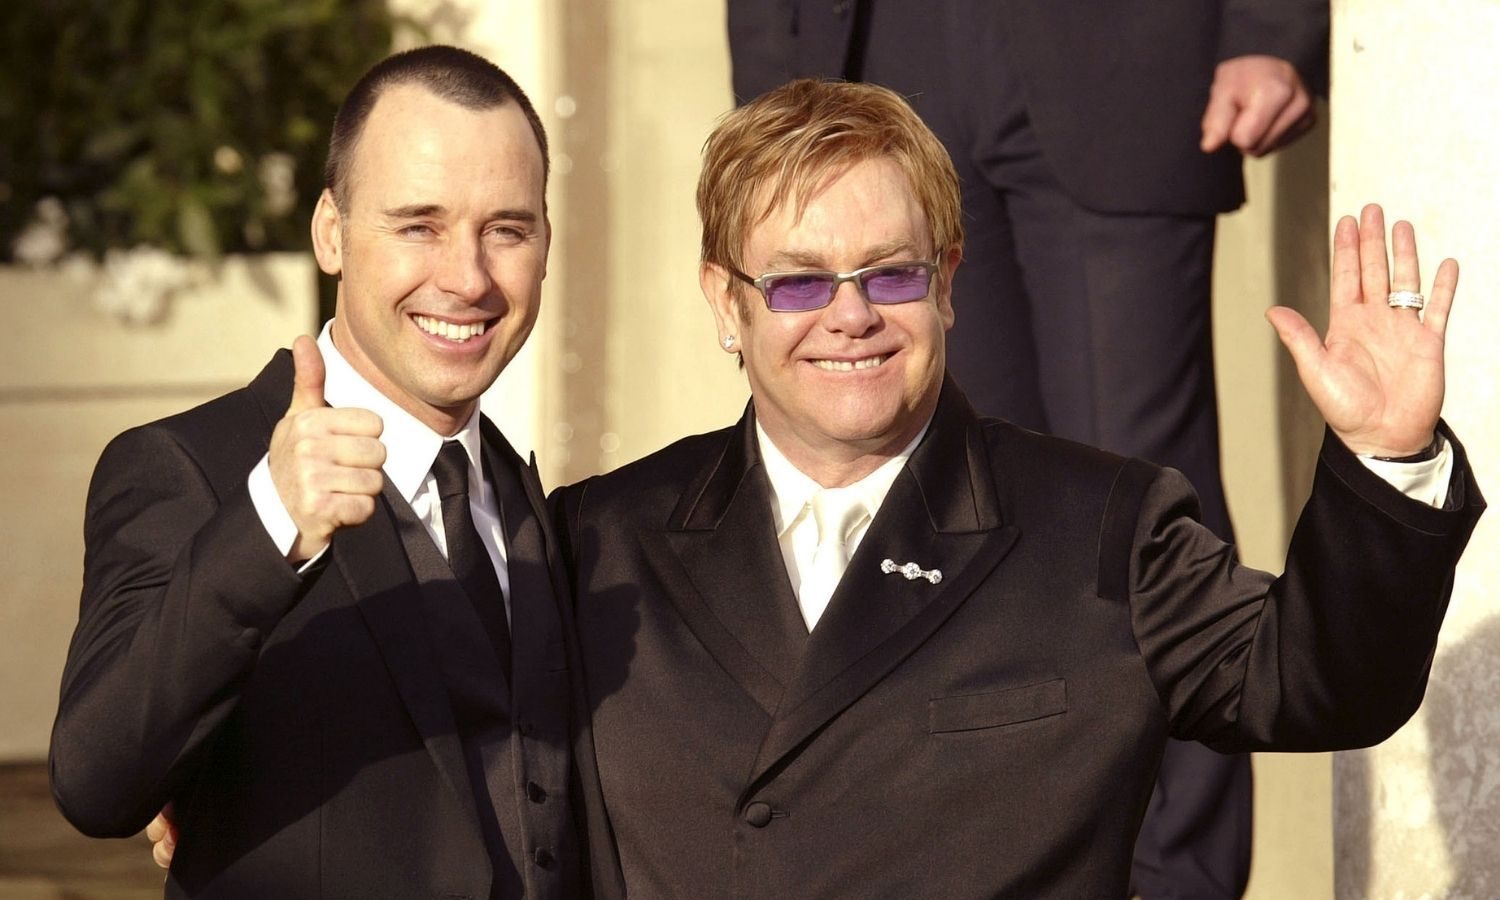 OTD in 2005: Elton John and his partner David Furnish registered their civil partnership at Windsor Town Hall on the first day civil partnerships could legally be performed in England.